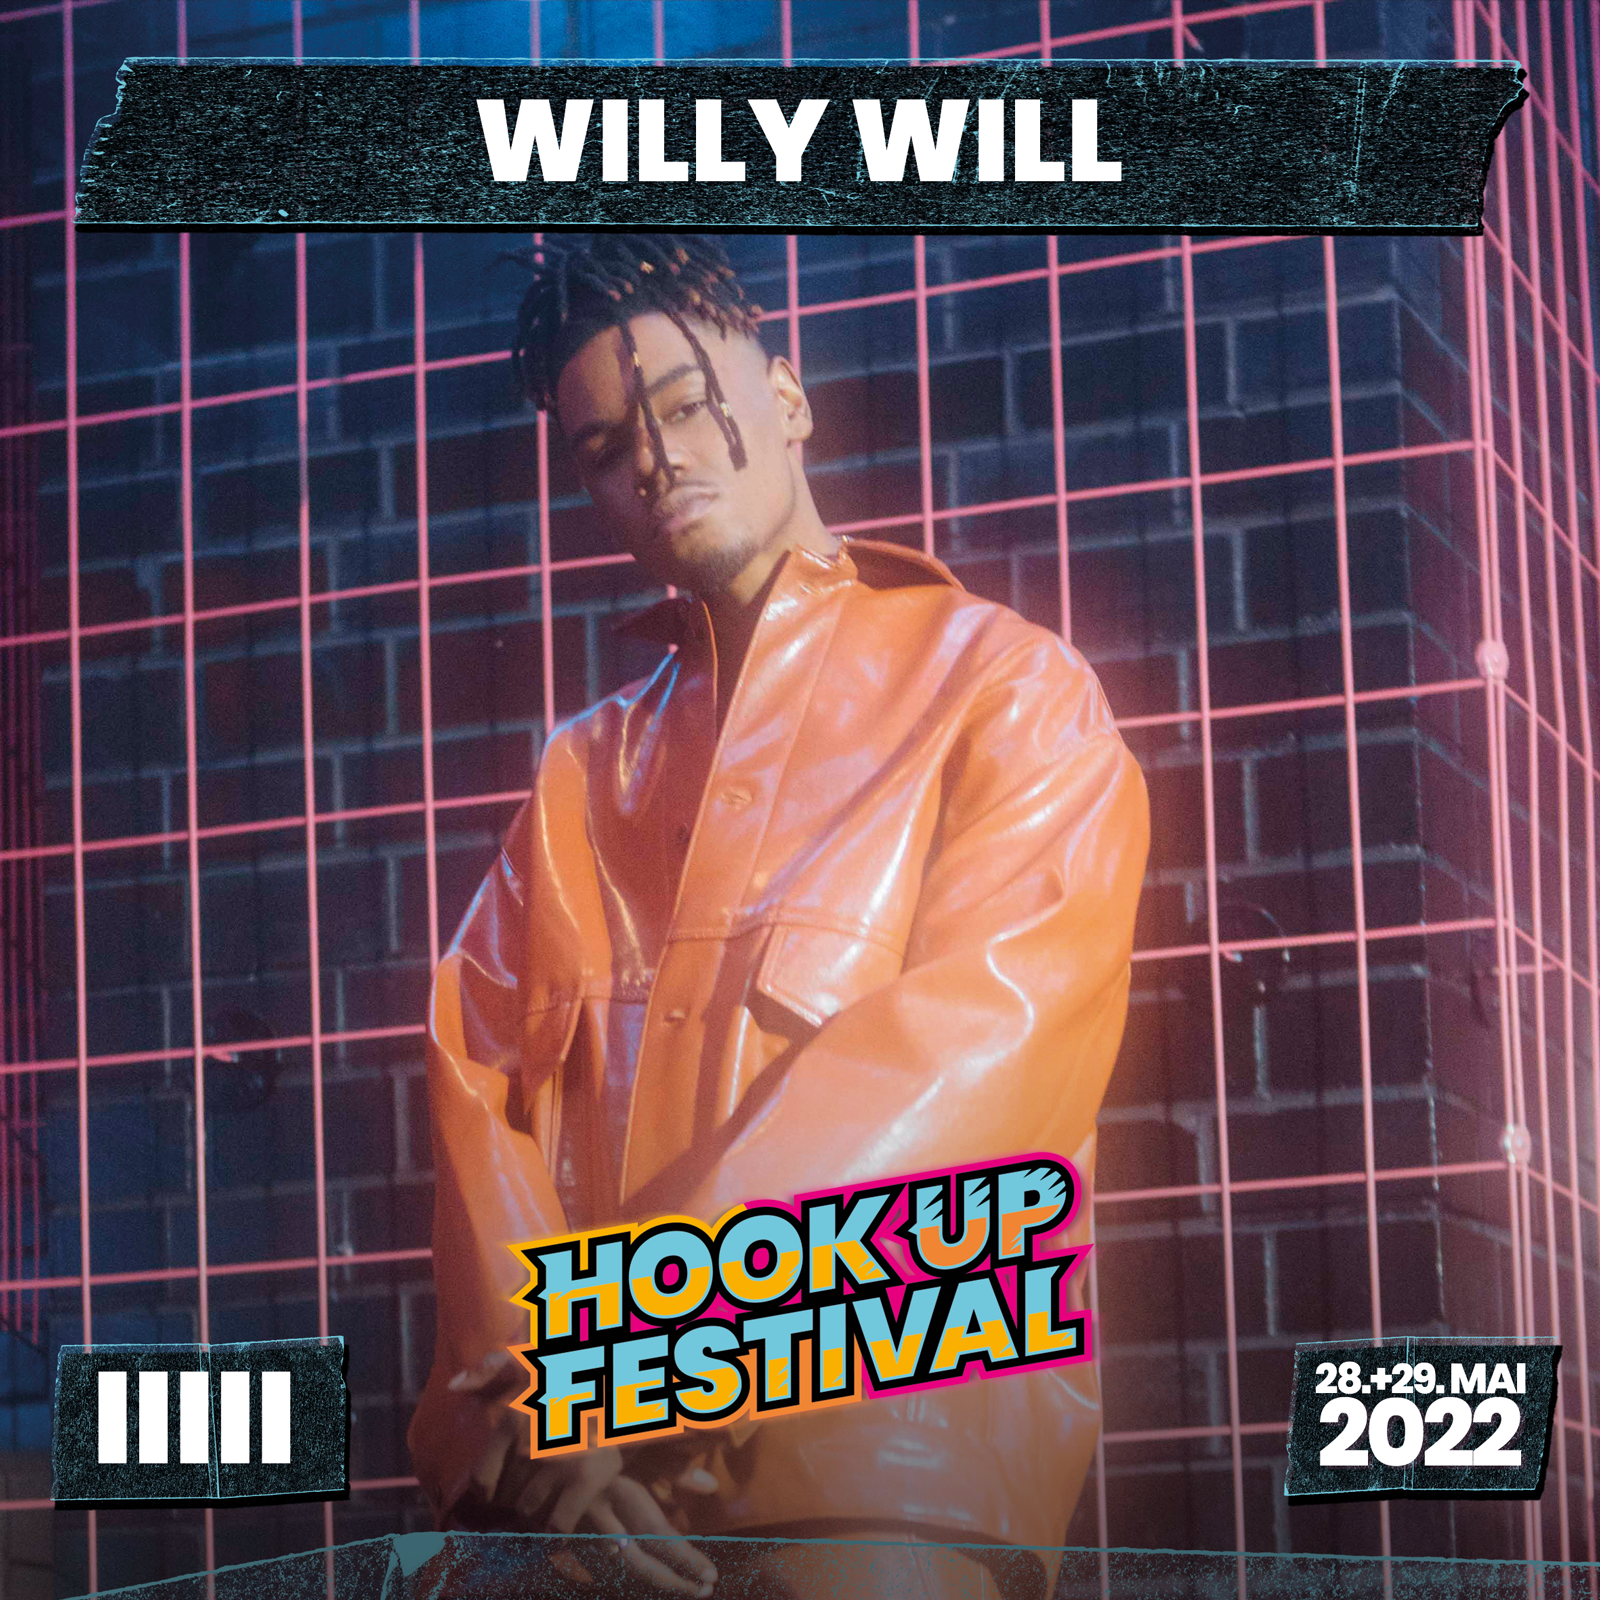 WILLY WILL HOOK UP FESTIVAL 2022 KARLSRUHE